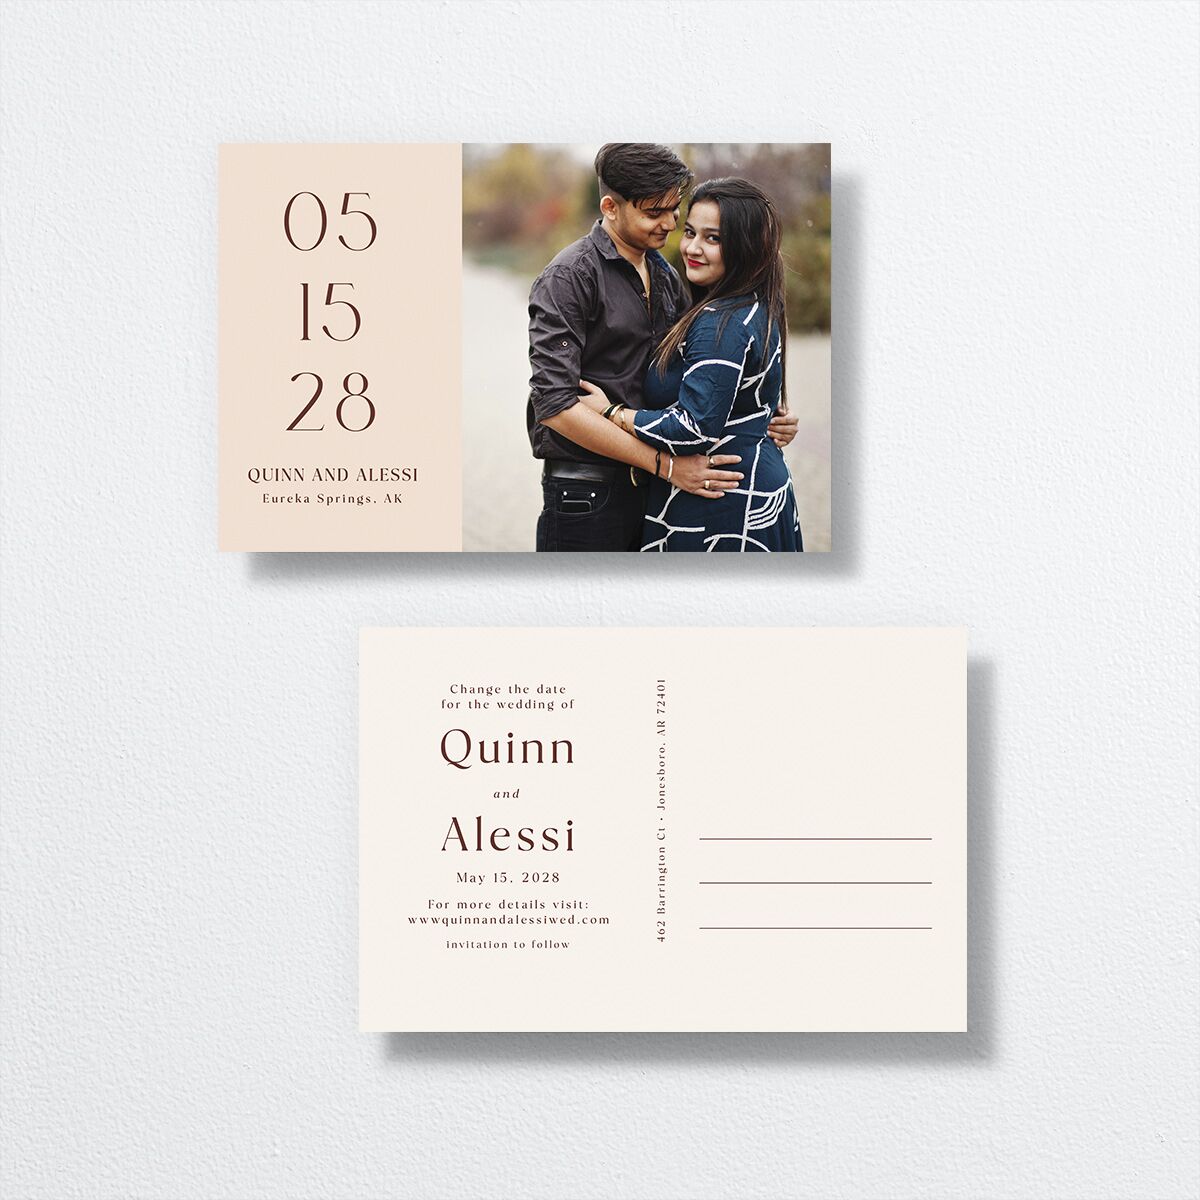 Sunlit Vows Change the Date Postcards front-and-back